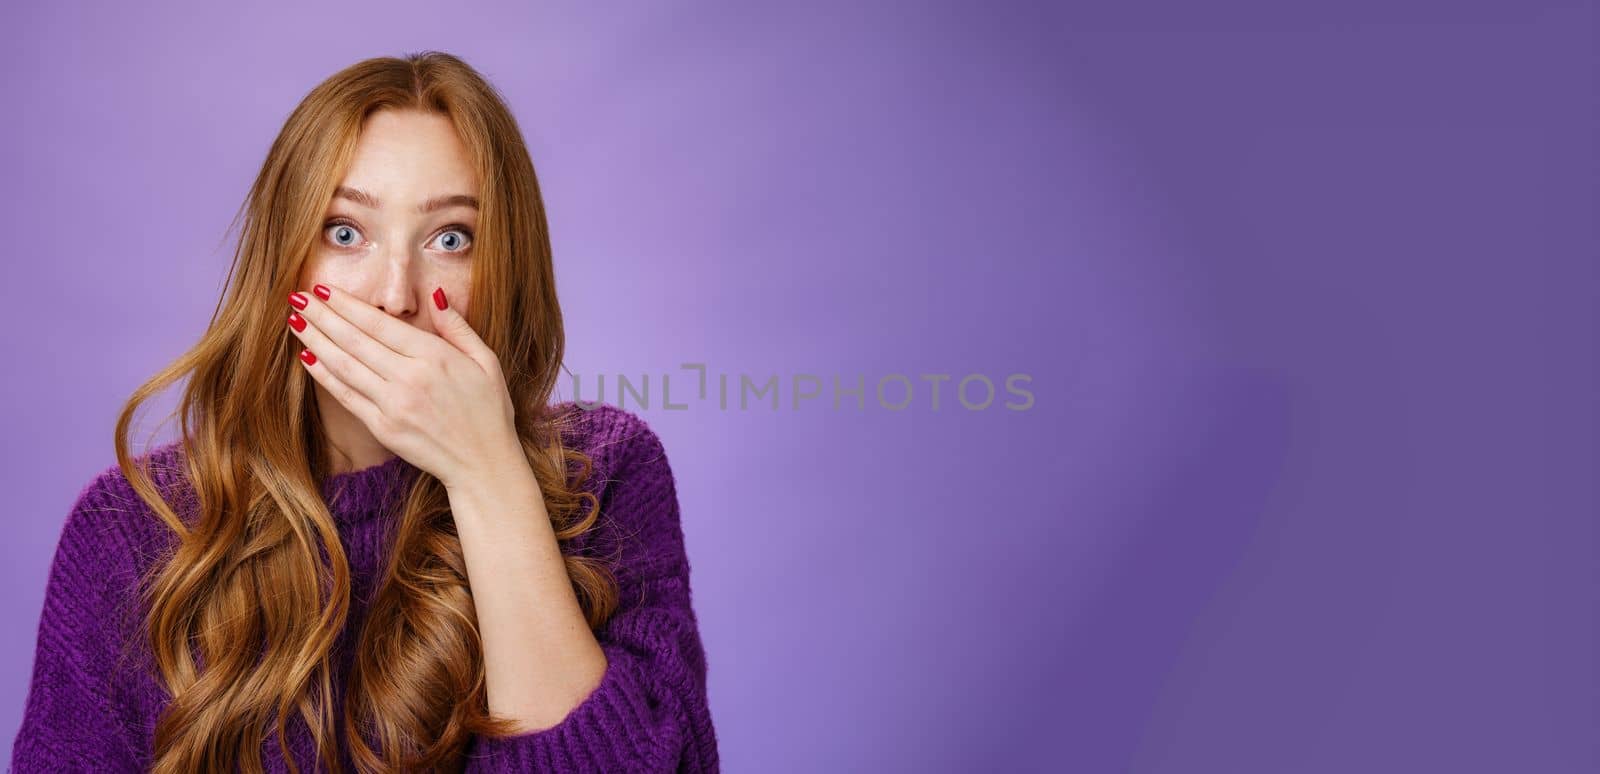 Lifestyle. Impressed speechless cute ginger girl hearing stunning gossip covering mouth form amazement and shook raising eyebrows wondered as reacting to unexpected revelation or rumor over purple background.